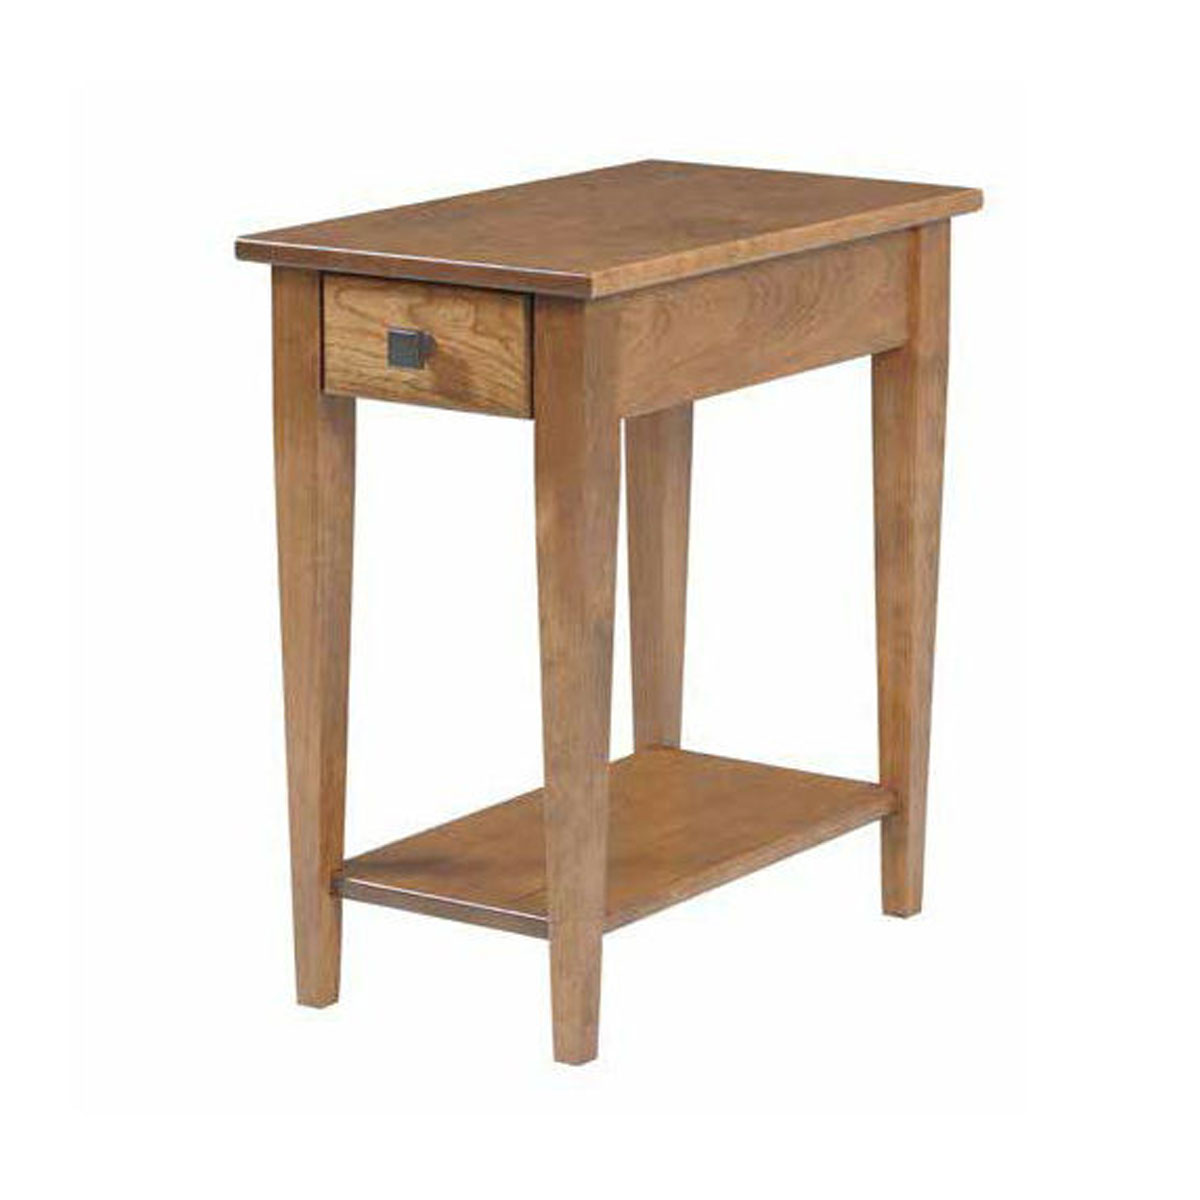 Woodland Shaker 201 Chairside Table